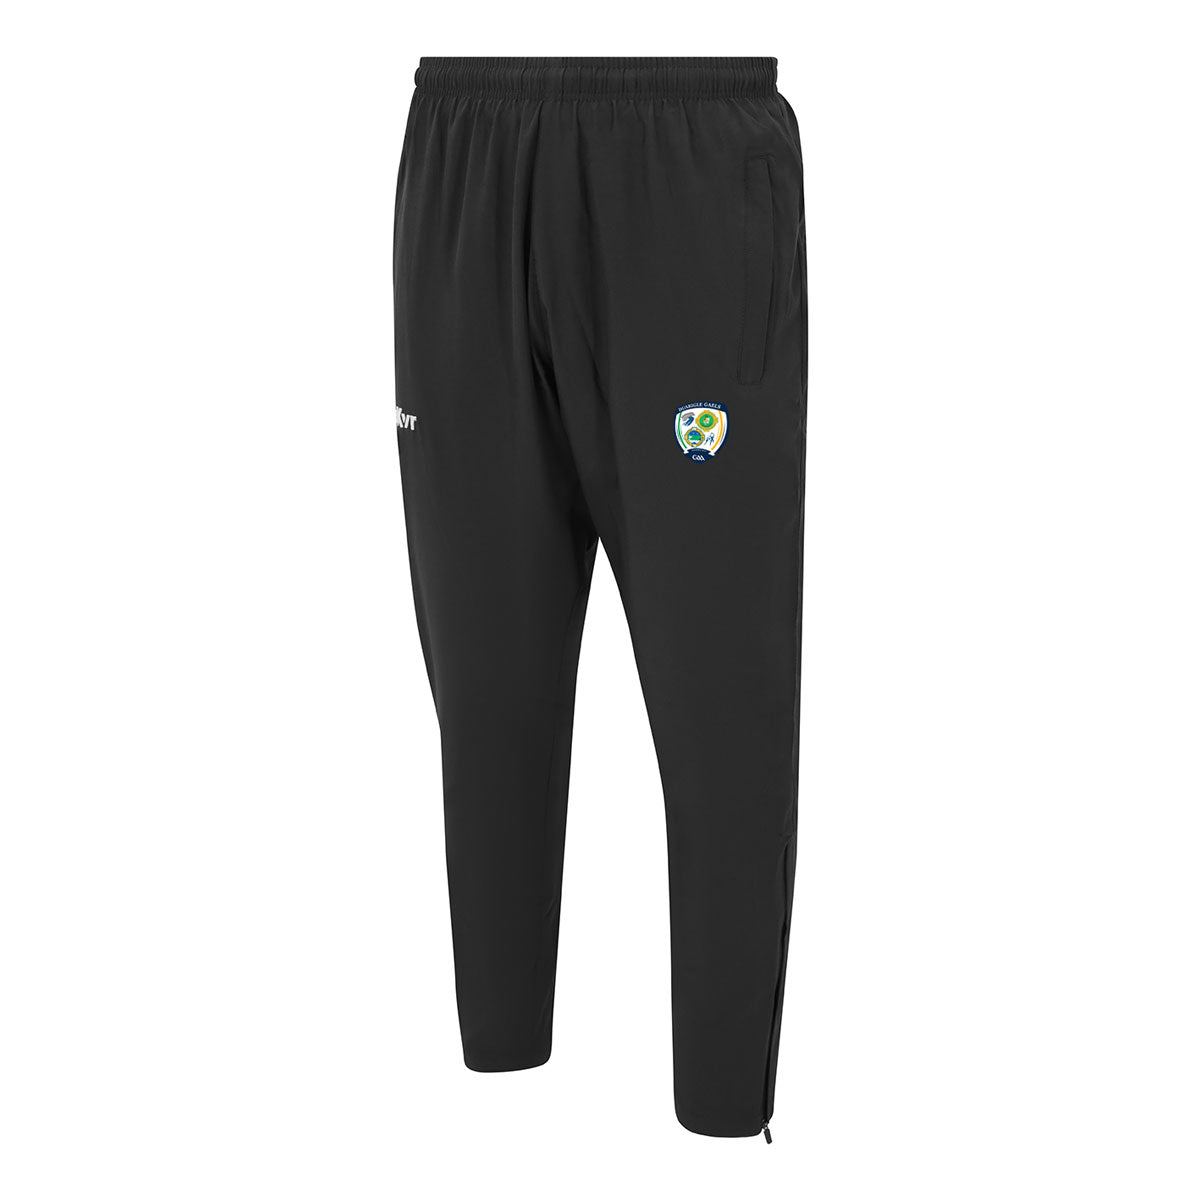 Mc Keever Duarigle Gaels Core 22 Tapered Pants - Youth - Black